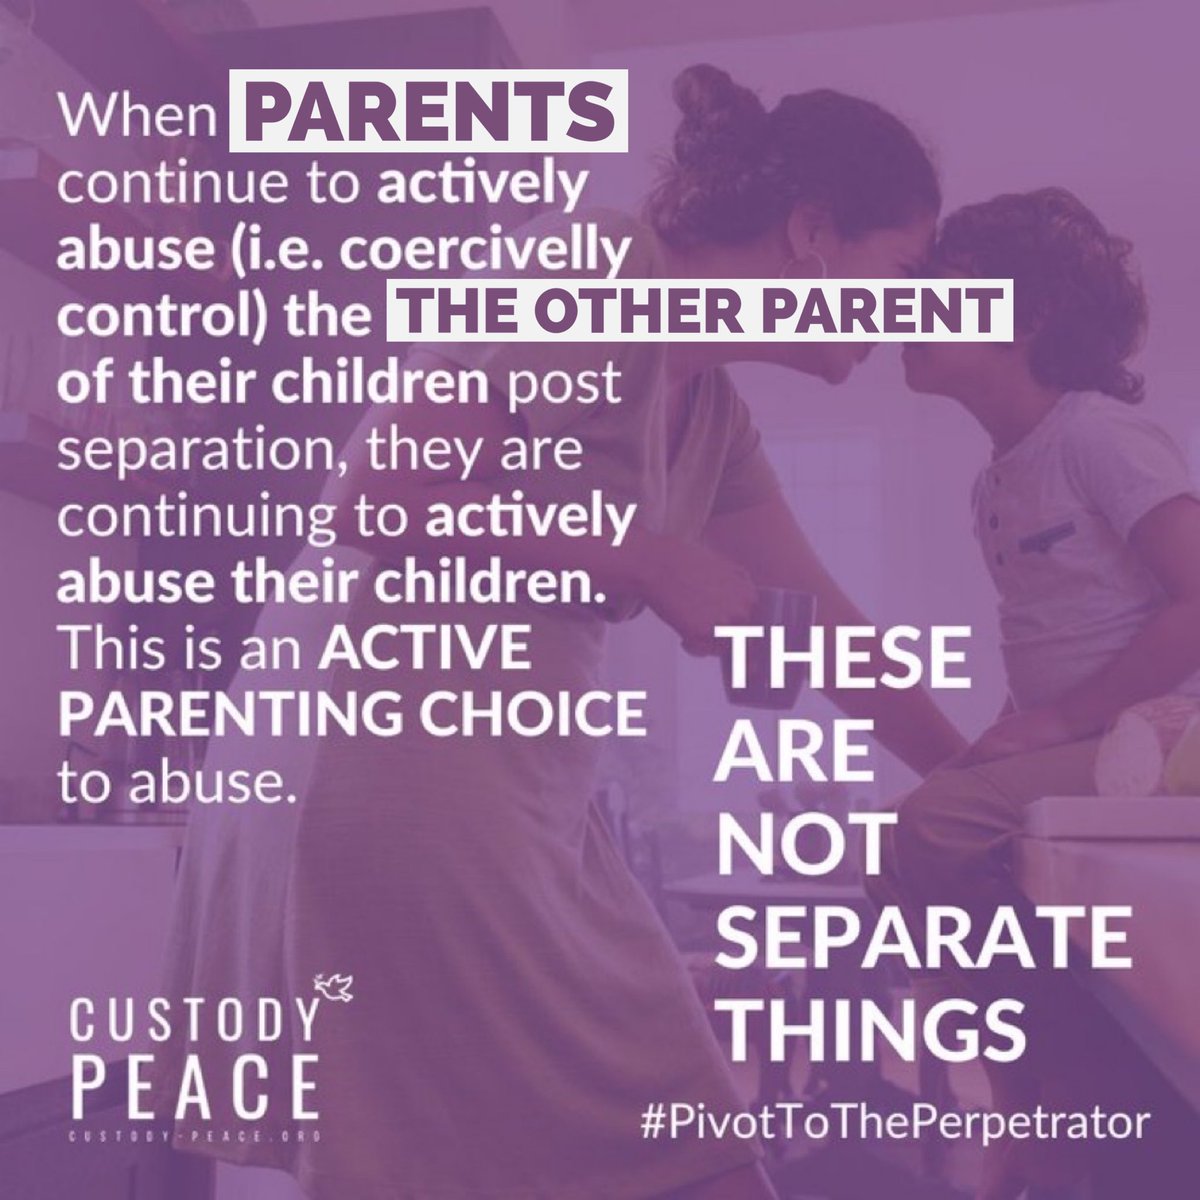 @custodypeace
'Most anything the perpetrator does to the adult victim-survivor will be directly harming the child victims-survivors too, and the perpetrator is the one responsible for those harms to the children.' - @DrEmmaKatz #CoerciveControl #PivotToThePerpetrator